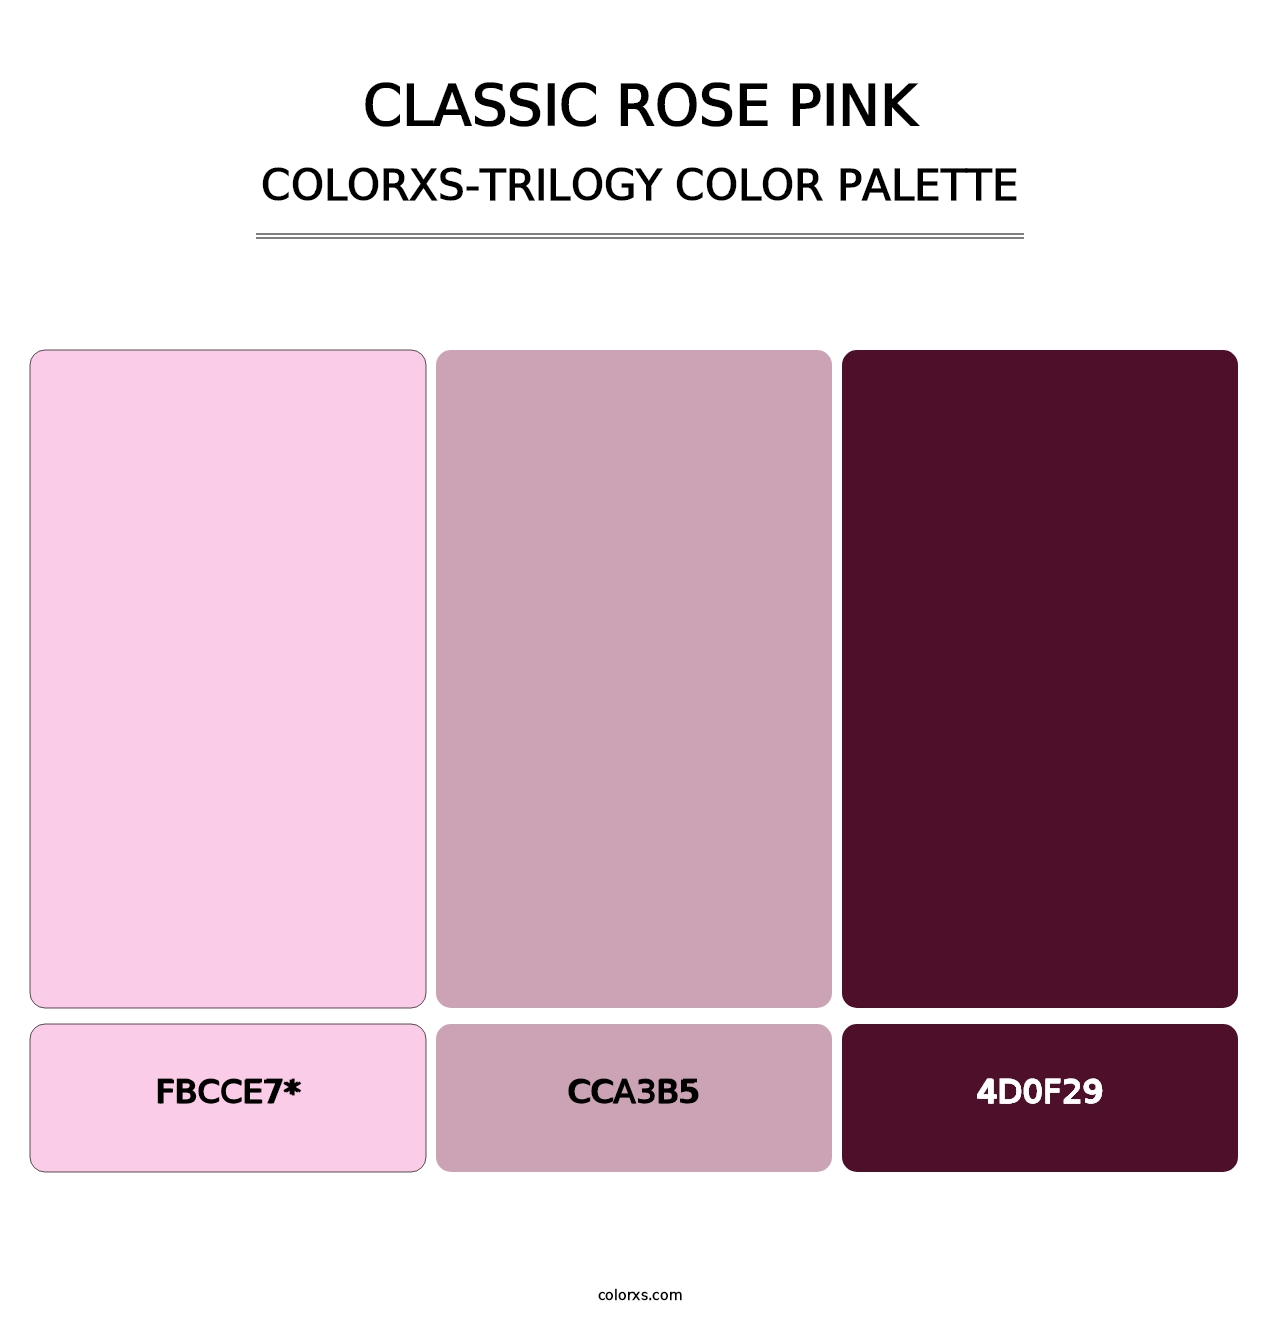 Classic Rose Pink - Colorxs Trilogy Palette